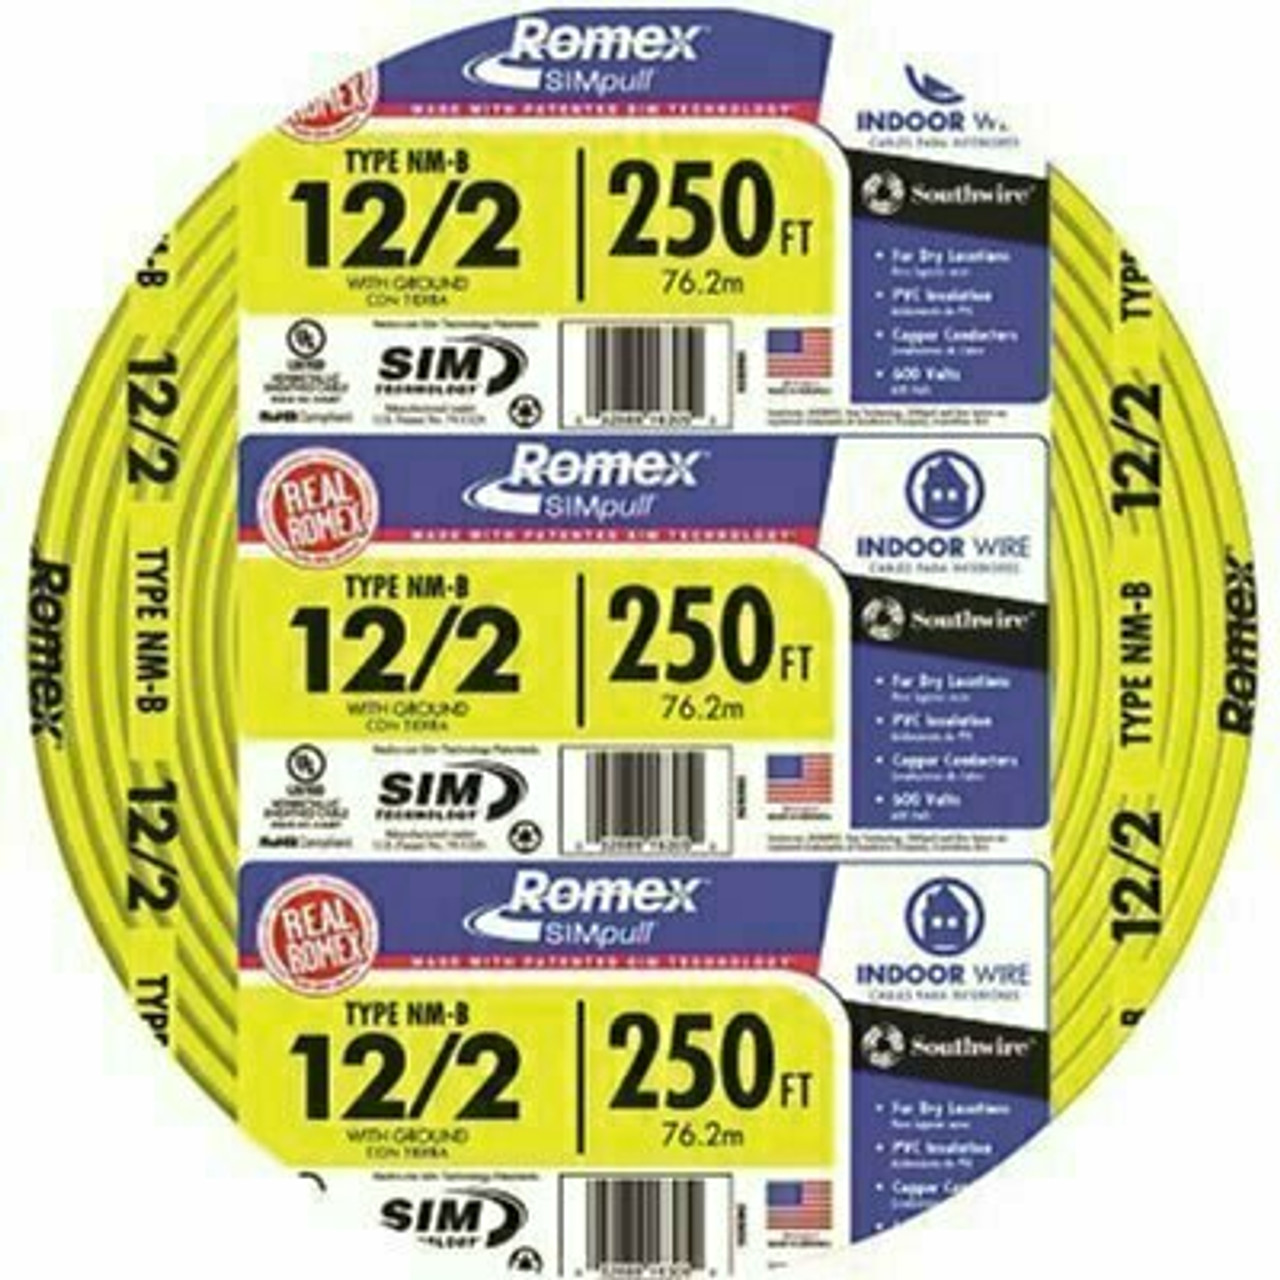 Southwire 250 Ft. 12/2 Solid Romex Simpull Cu Nm-B W/G Wire - 2487704